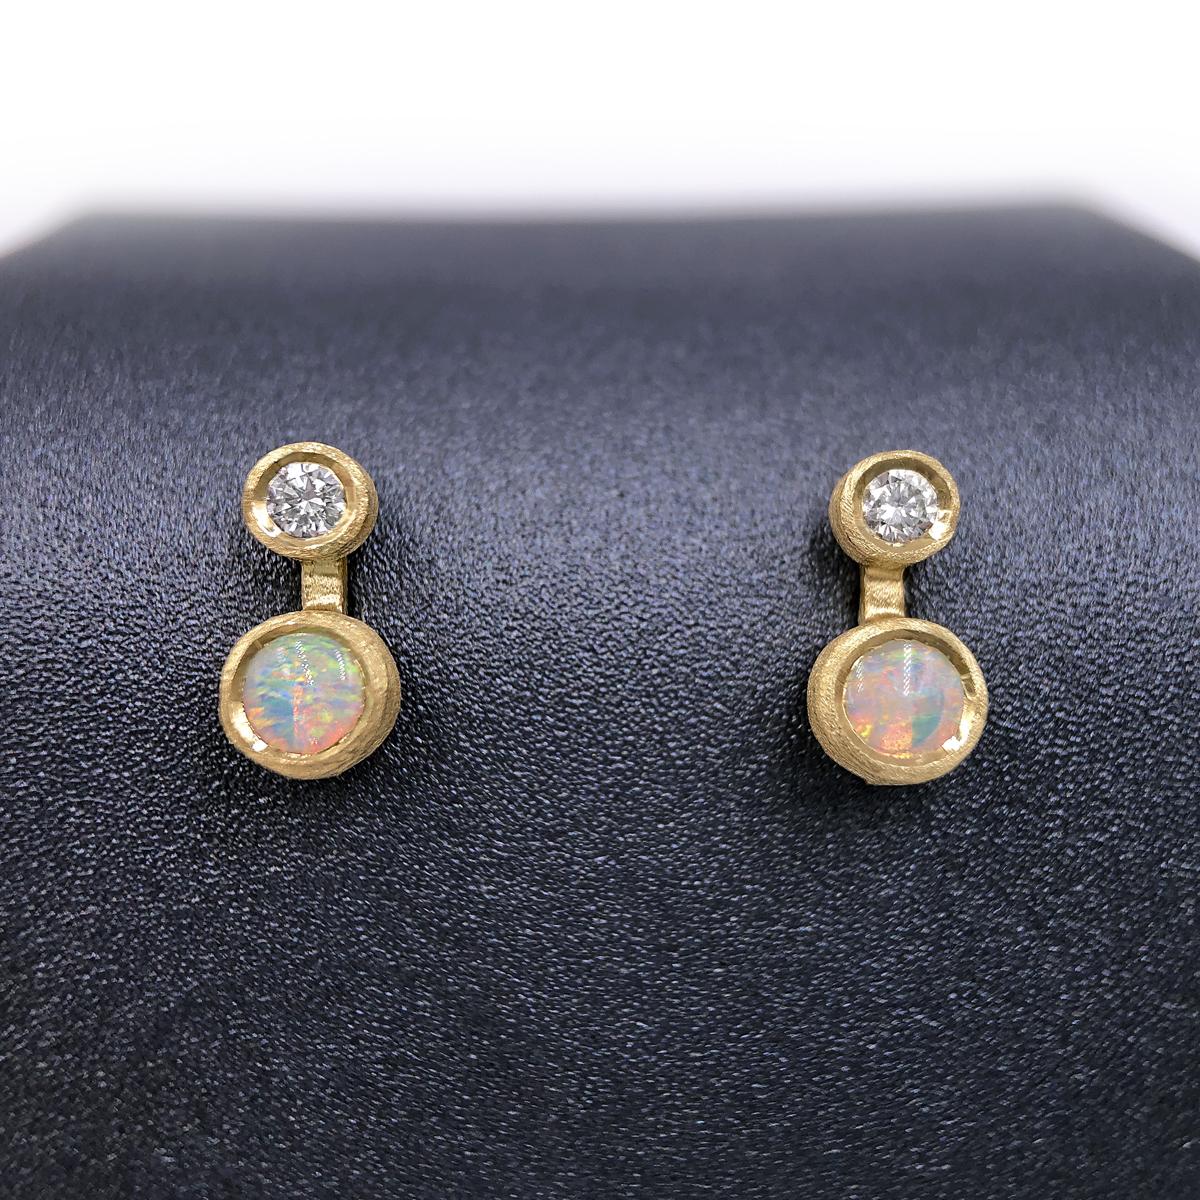 Nova Stud Earrings handcrafted in London by jewelry artist Shimell and Madden in satin-finished 18k yellow gold with 0.08 total carats of round brilliant-cut white diamonds and a matched pair of Australian opal cabochons, all bezel-set and attached